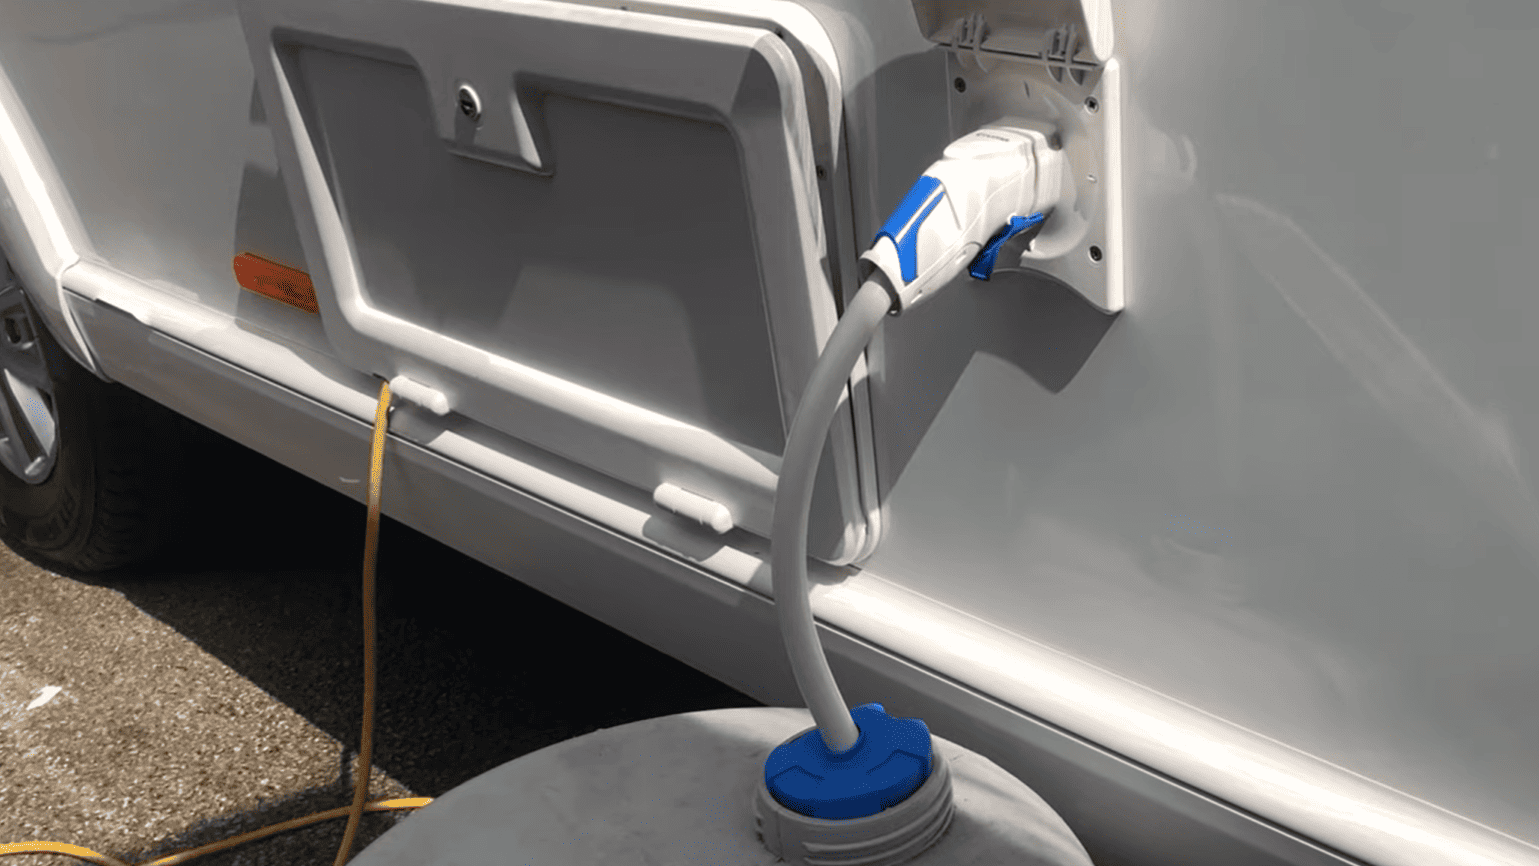 Image showing the process of filling up an RV's freshwater storage tank.